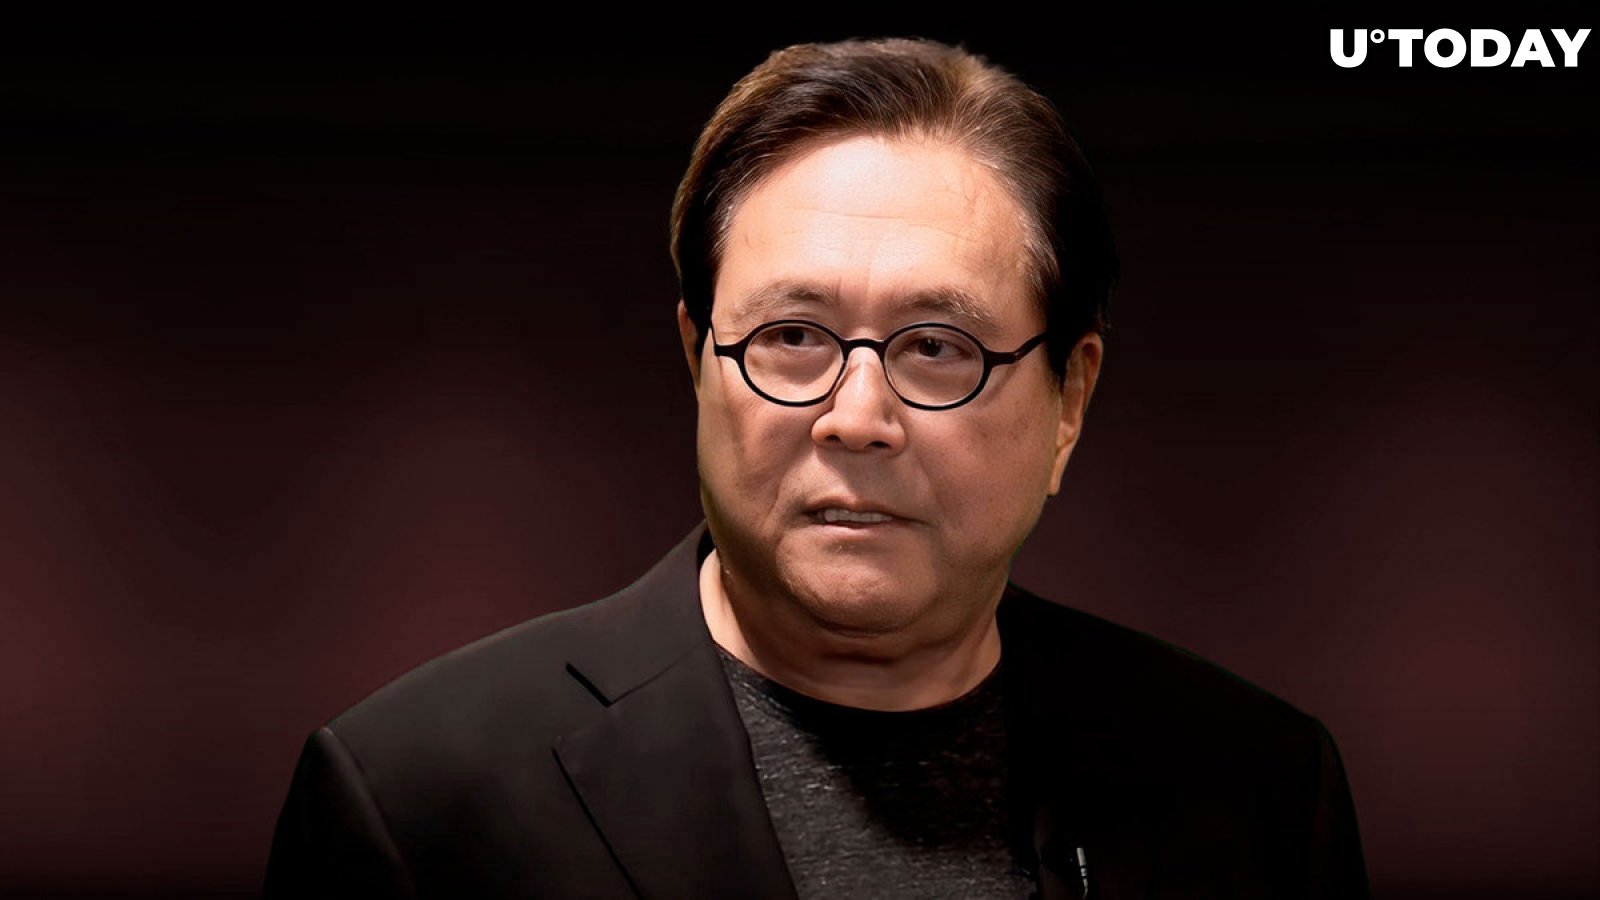 'Rich Dad Poor Dad' Author Kiyosaki Issues Major Warning: 'Get Money Out of Banks Now'